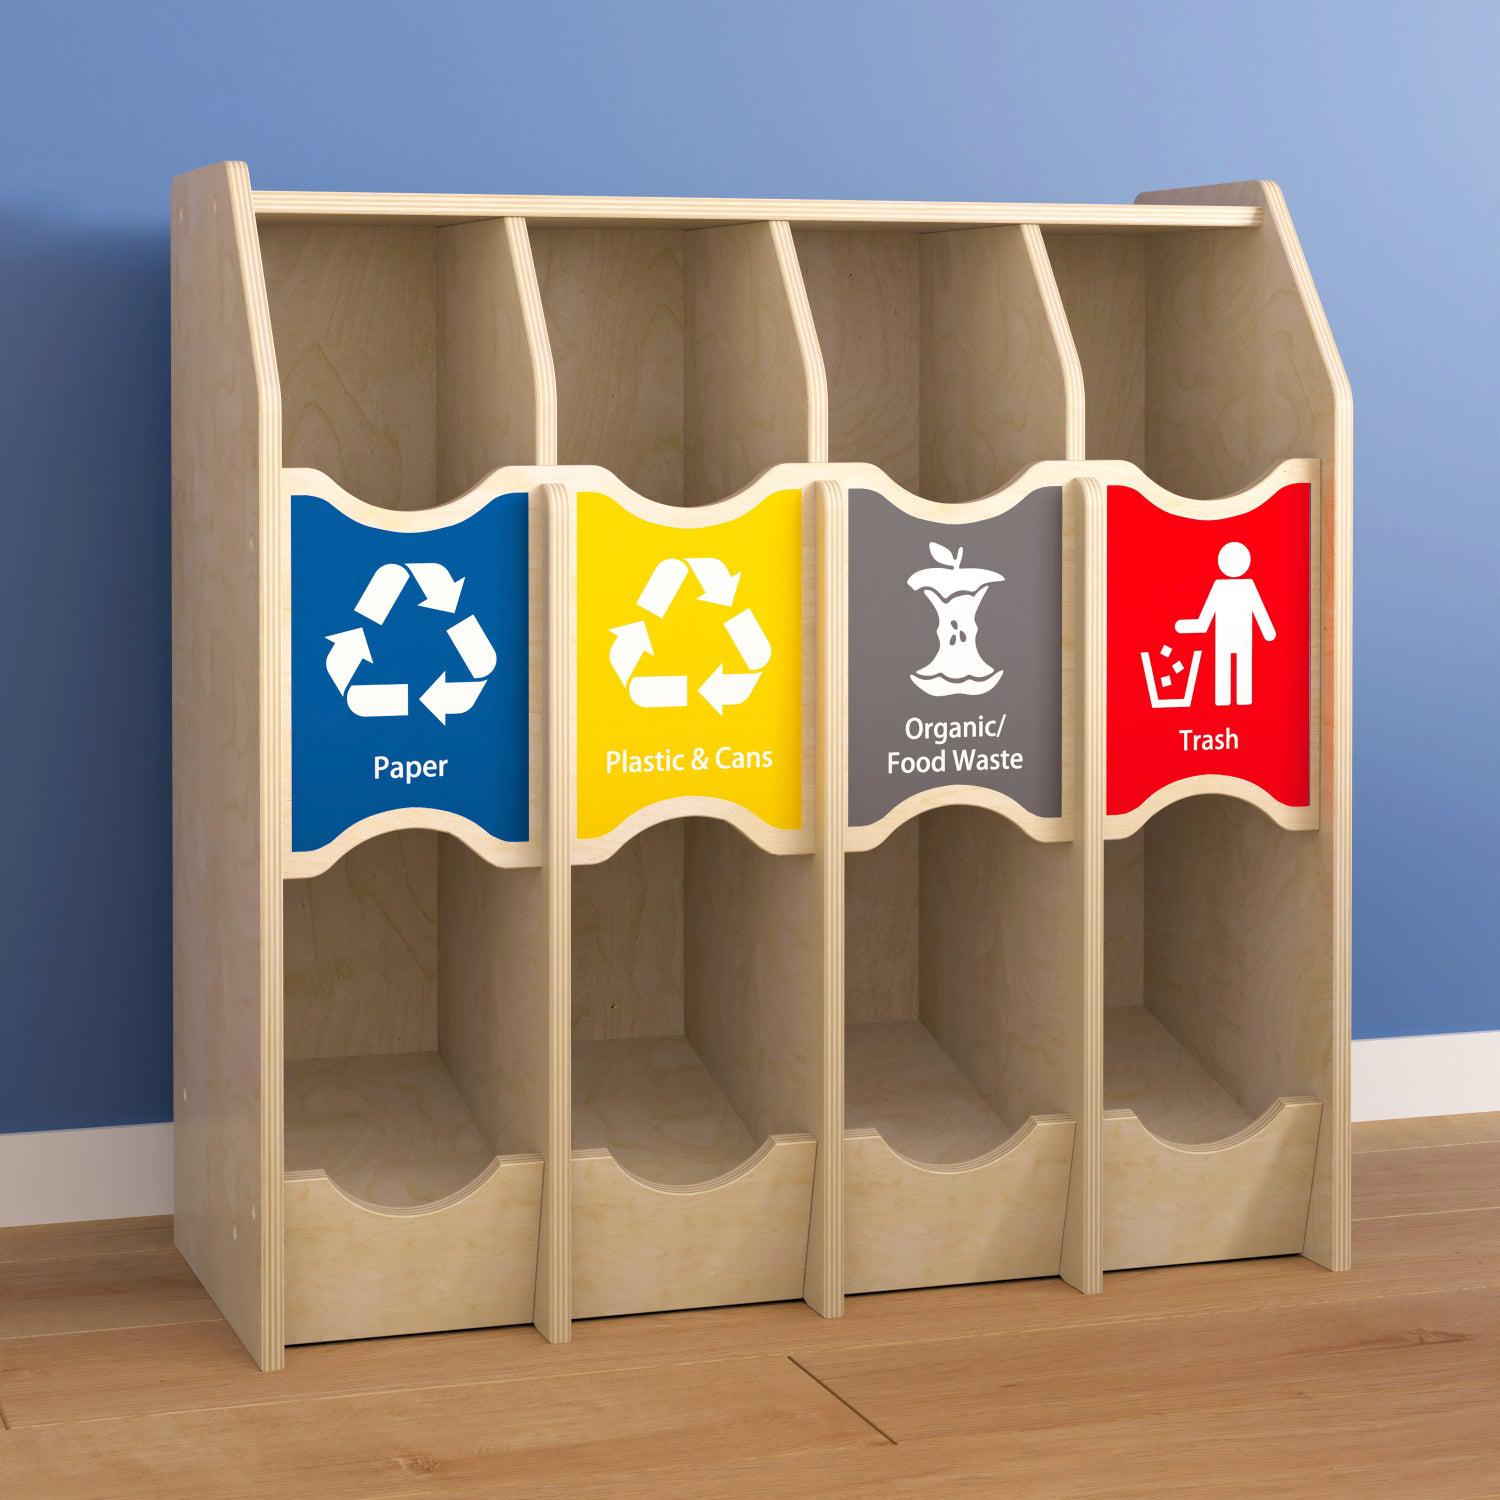 Bright Beginnings Commercial Grade Wooden Pretend Play Recycling Station for Children